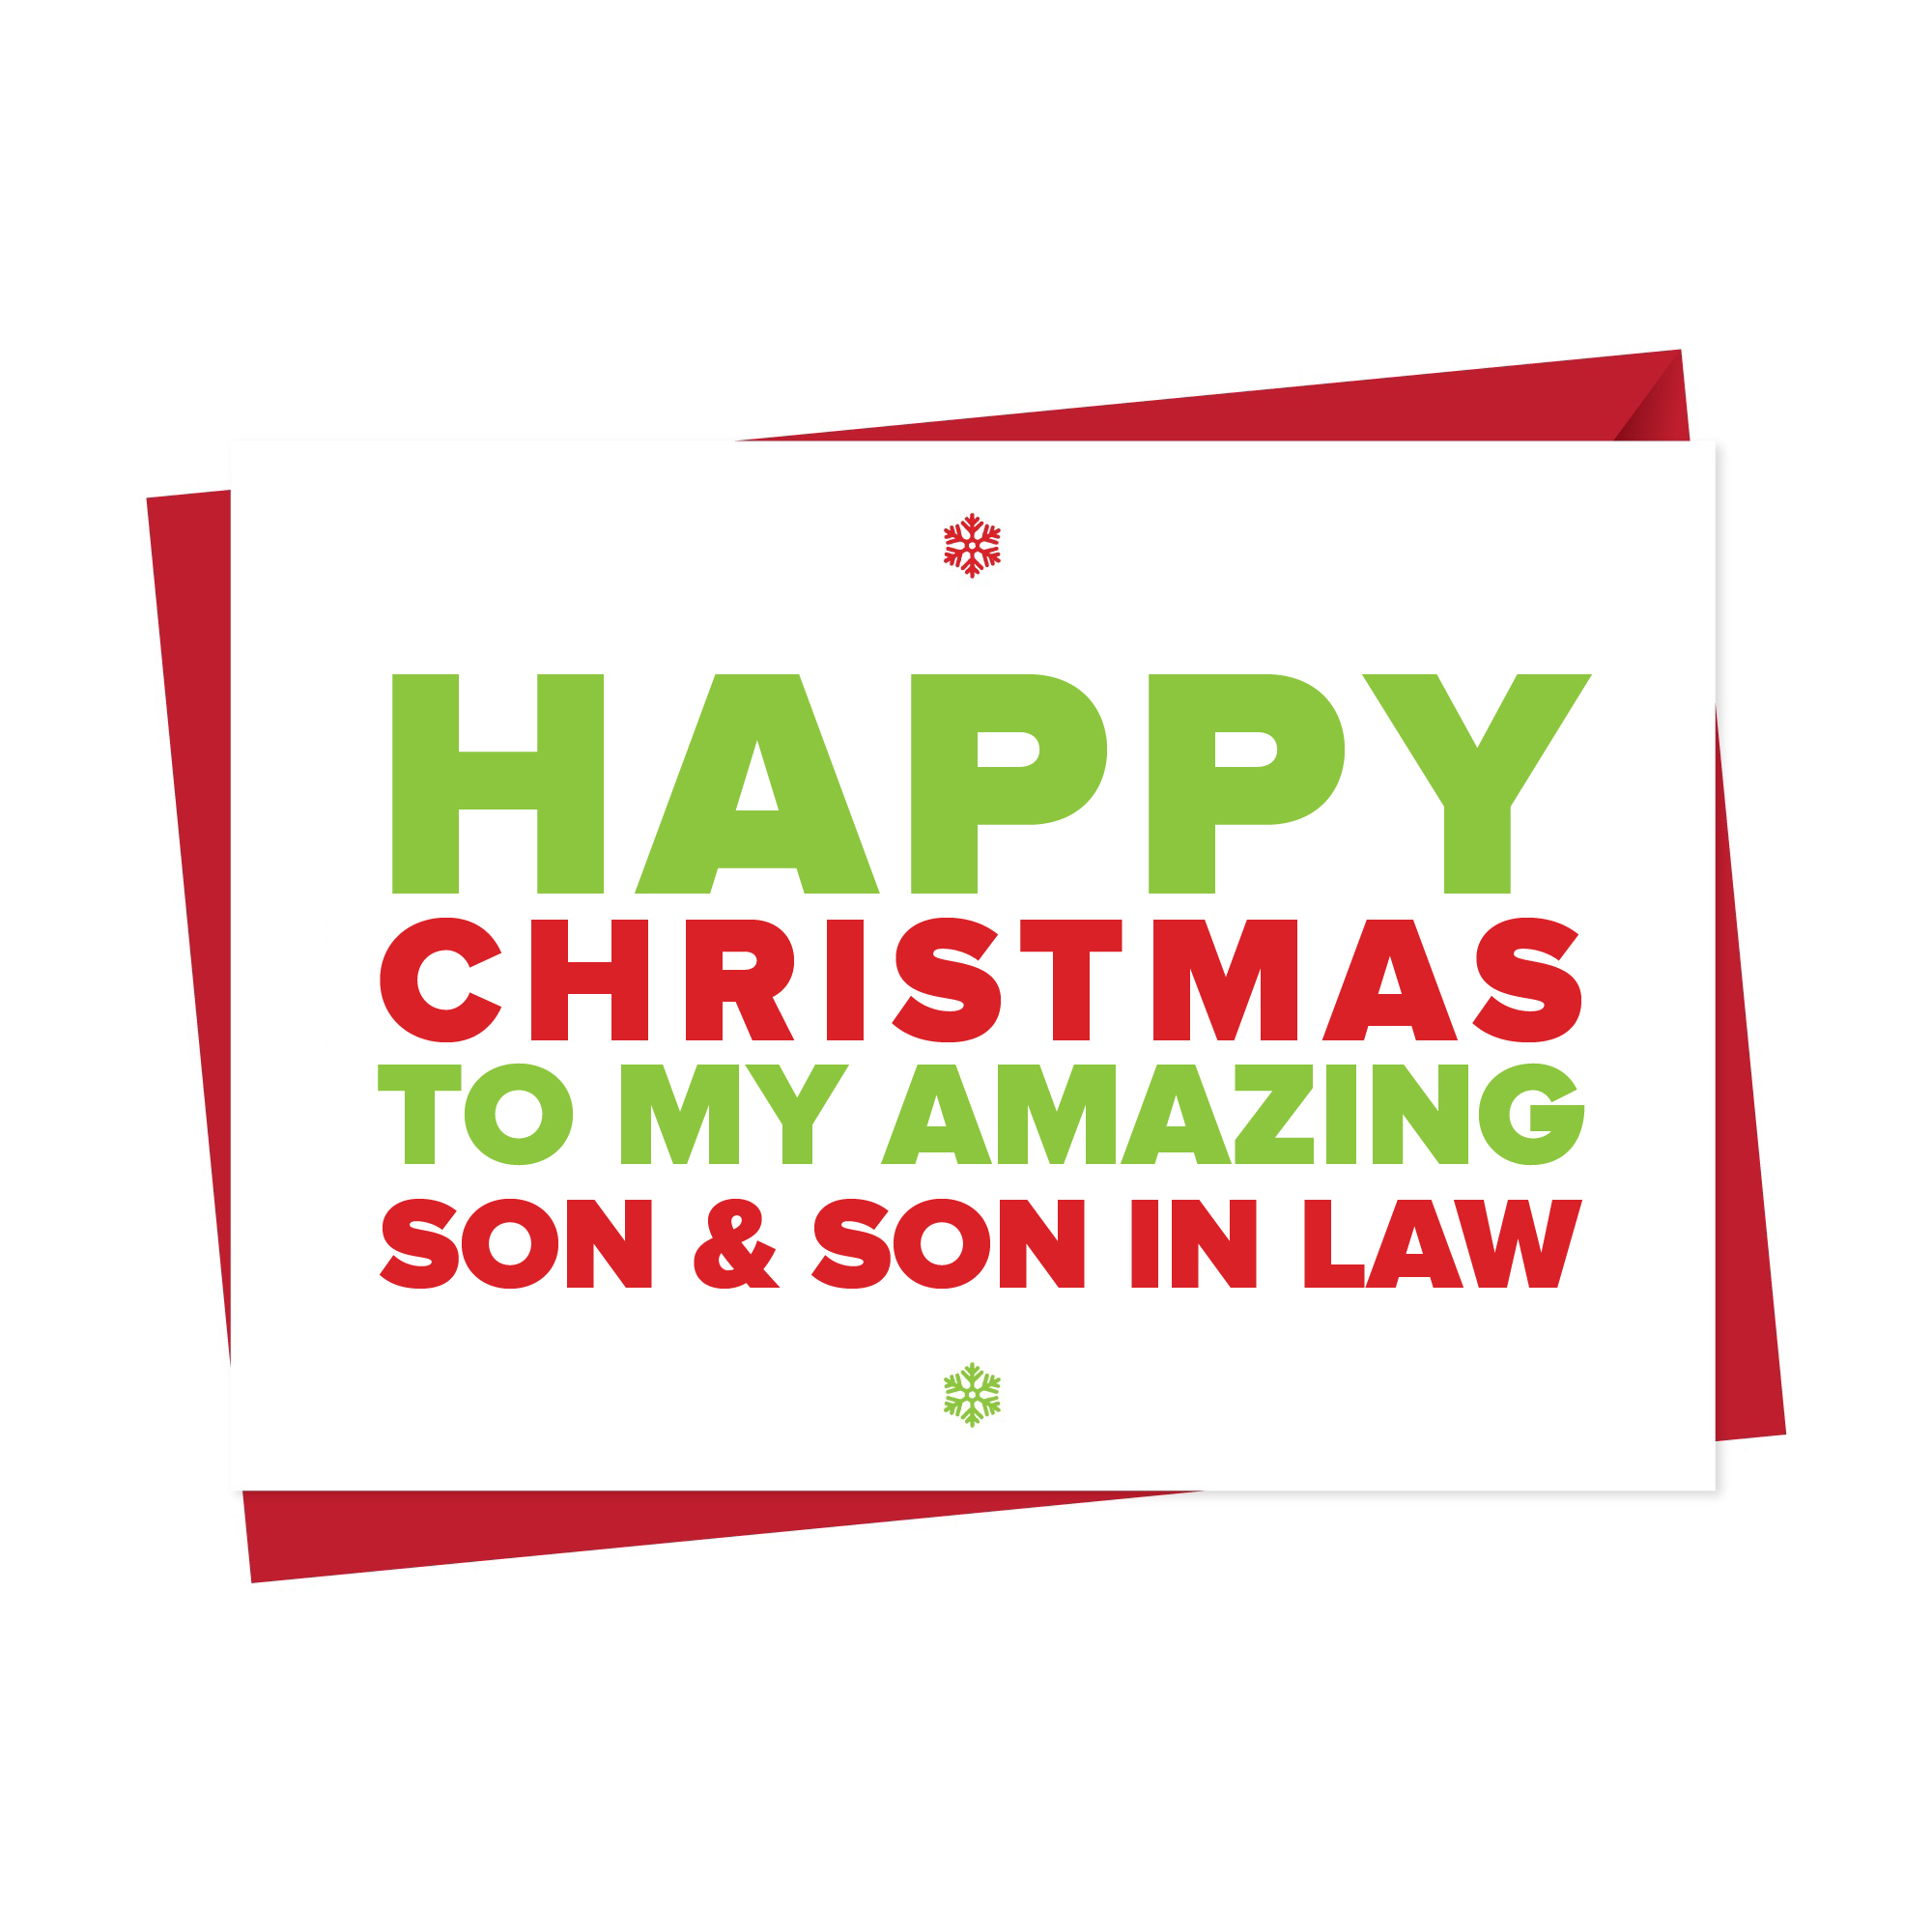 Christmas Card for An Amazing Son & Son in Law